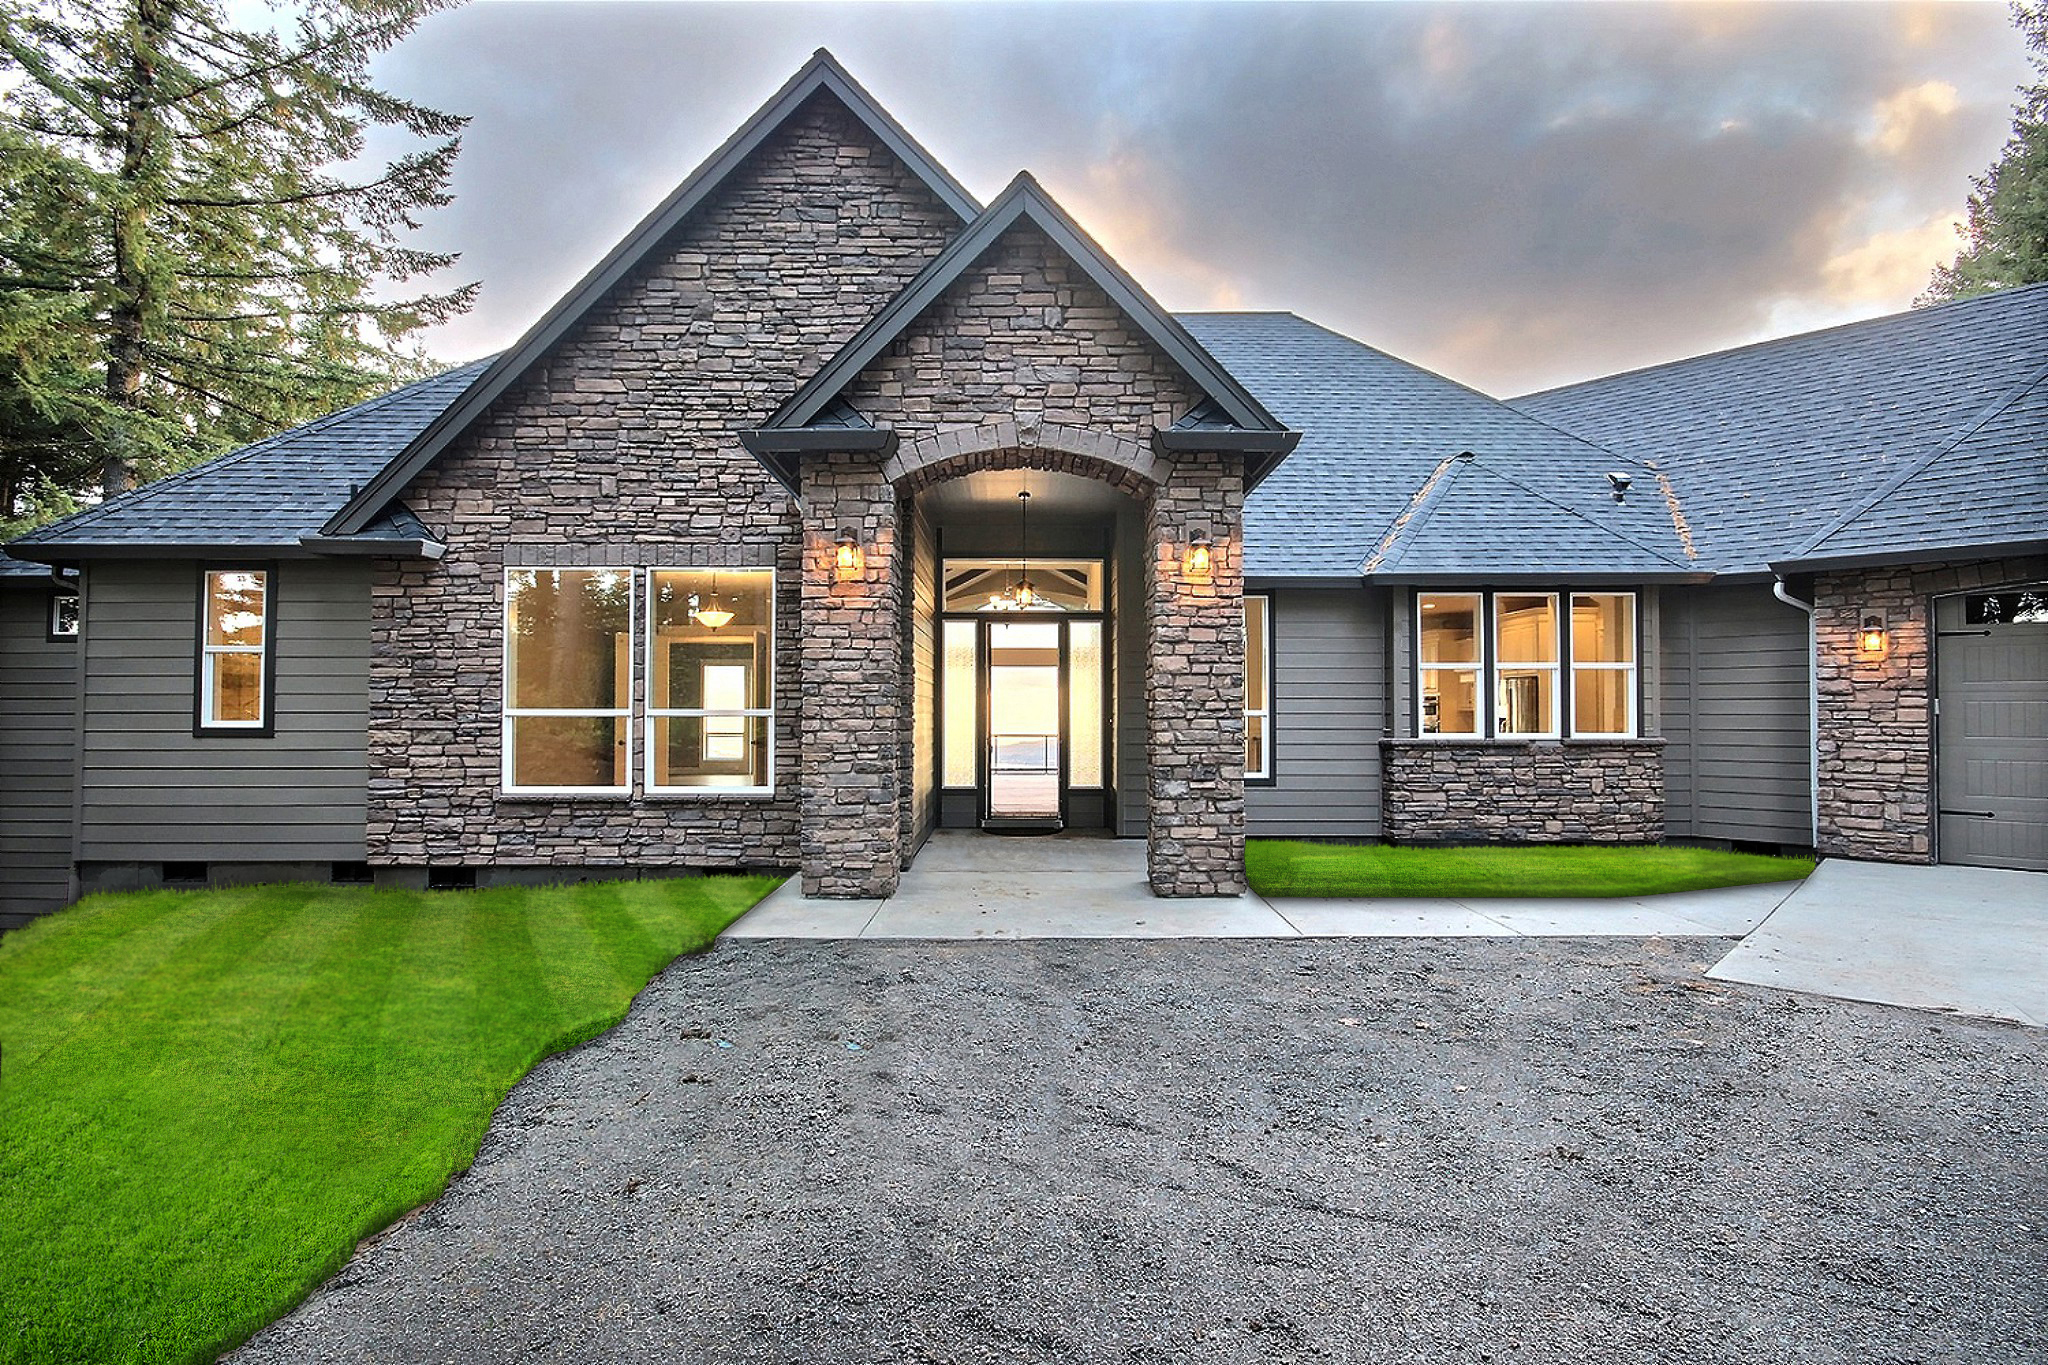 Vinyl windows were the perfect match on this new construction home